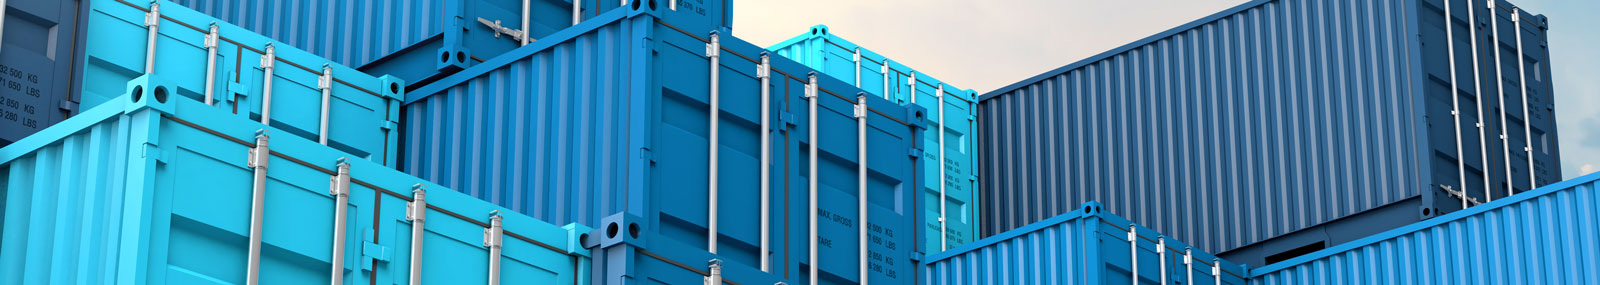 Blue industrial container